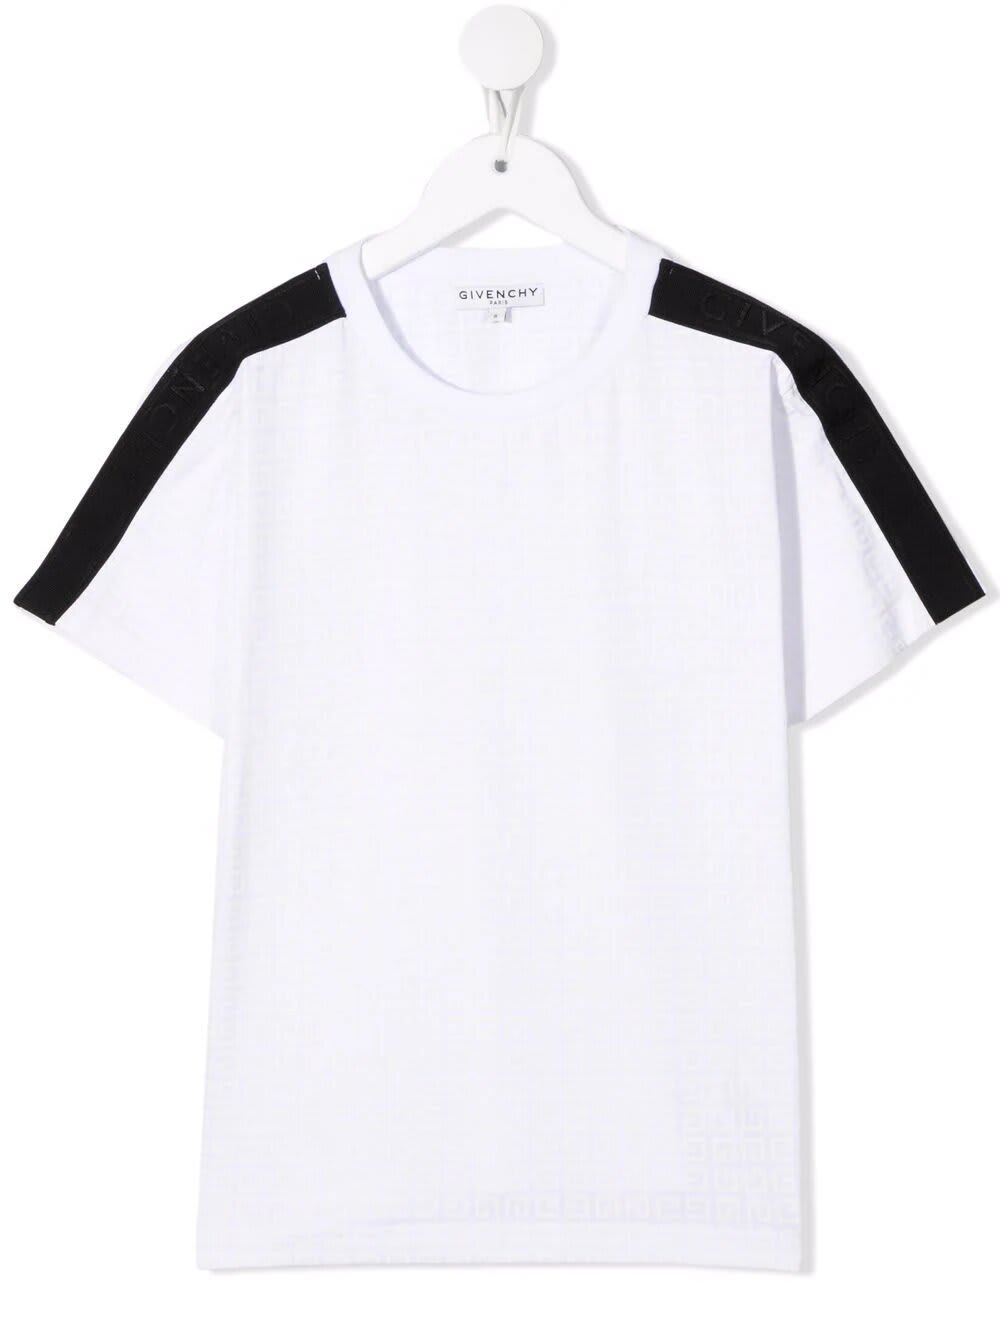 Givenchy Kids White T-shirt With 4g Motif And Black Logoed Tapes